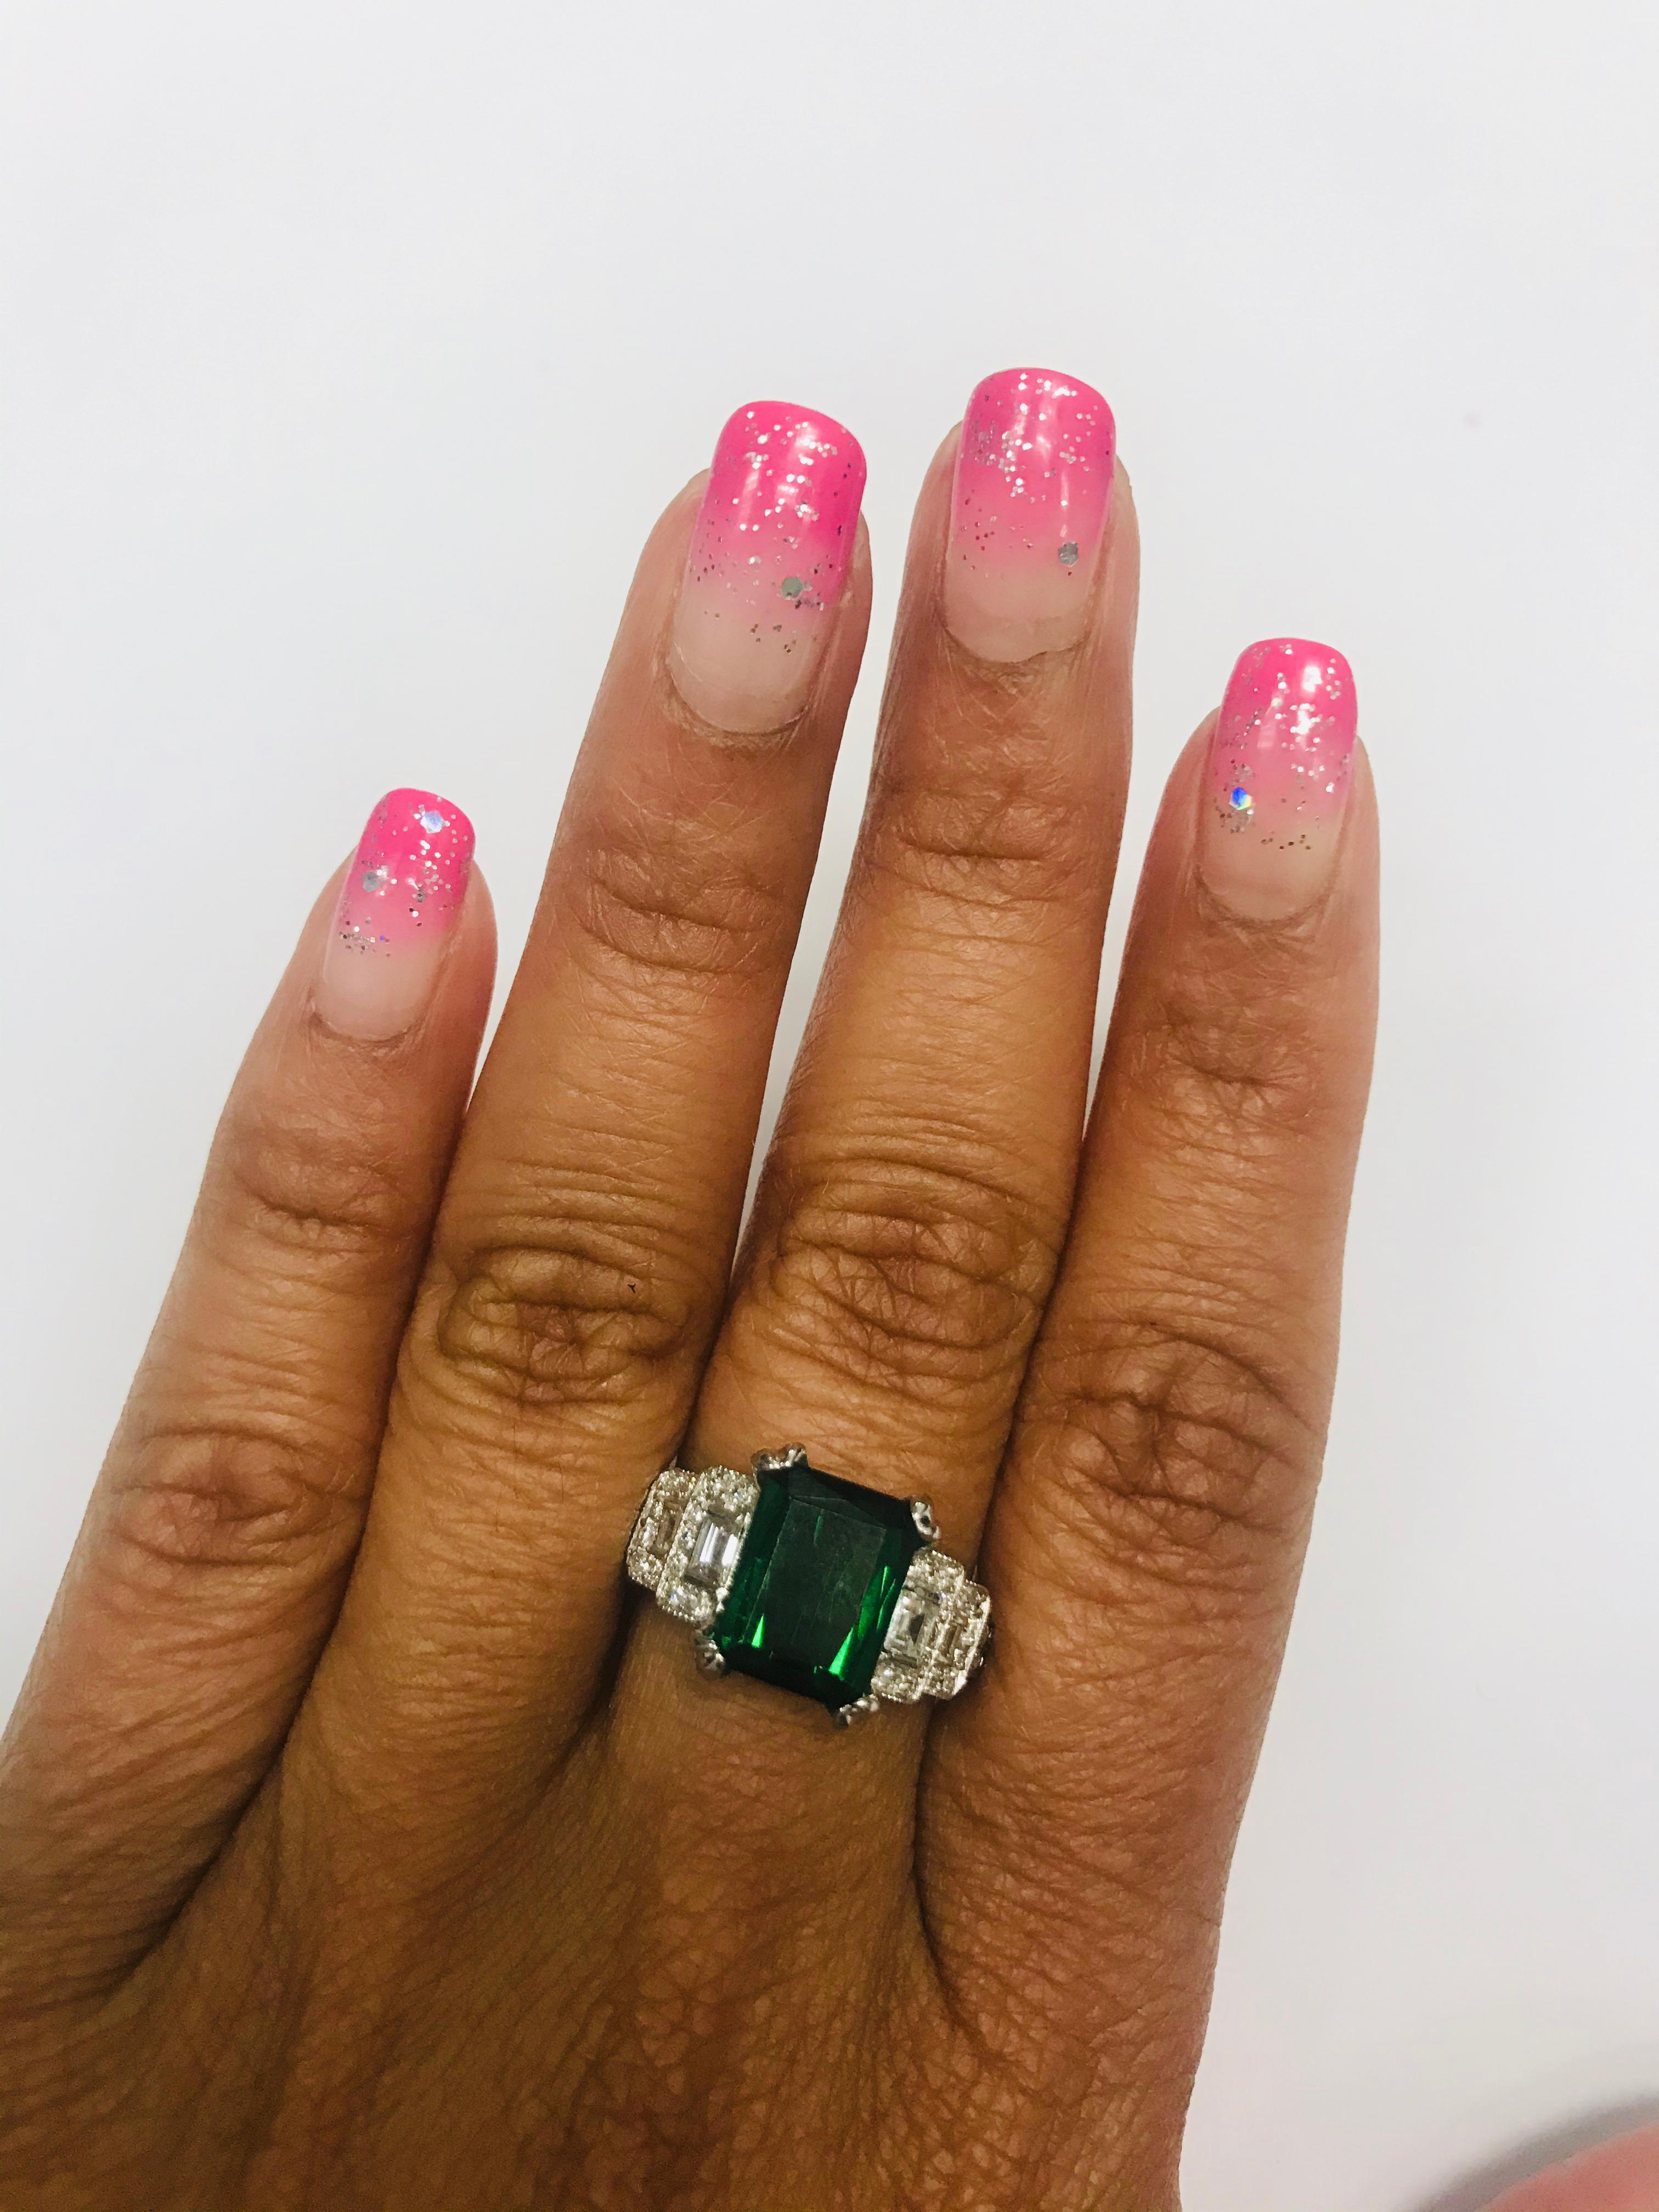 5.01 Carat Green Tourmaline and Diamond Ring 14 Karat White Gold In New Condition For Sale In Los Angeles, CA